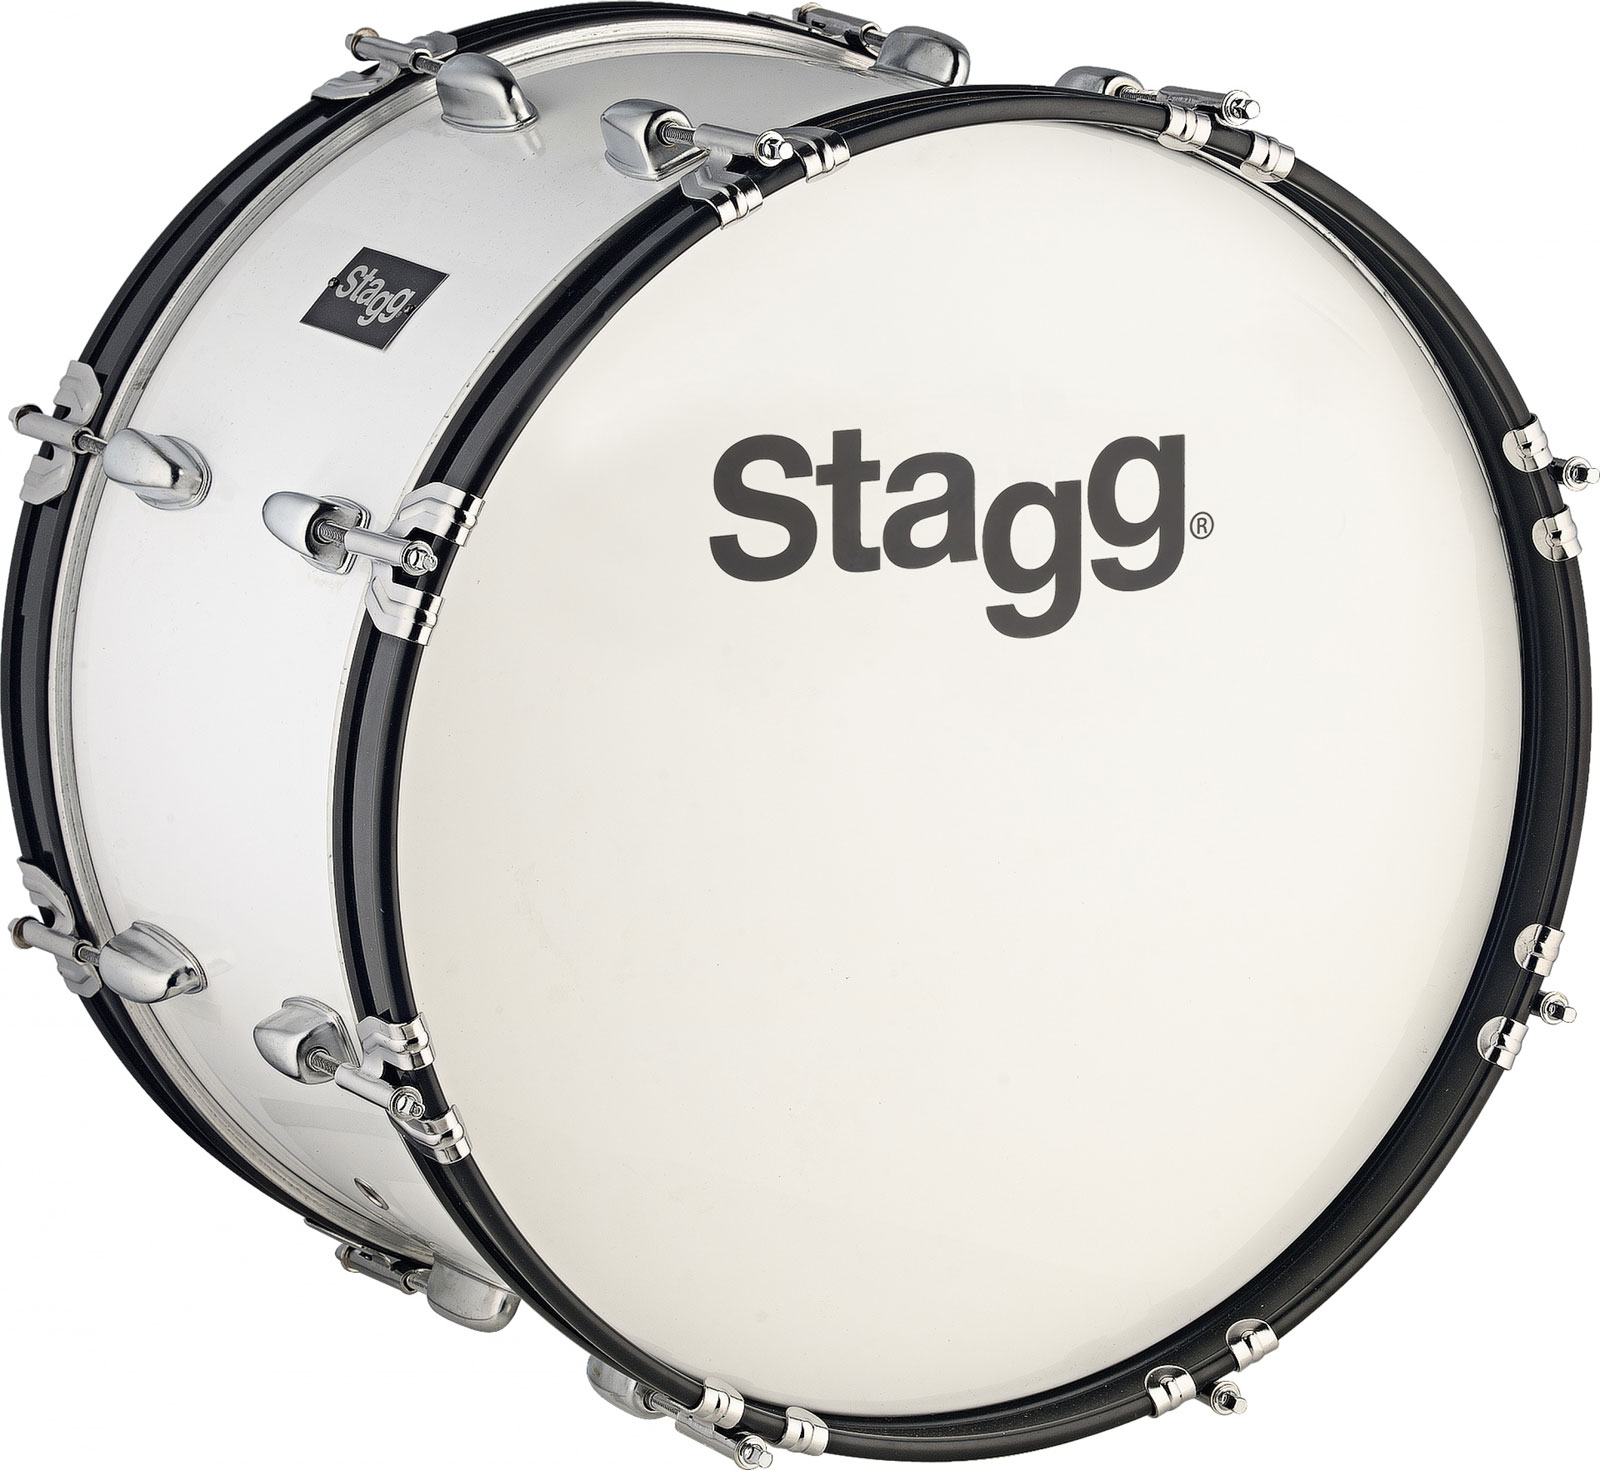 STAGG MABD-2610 - 26